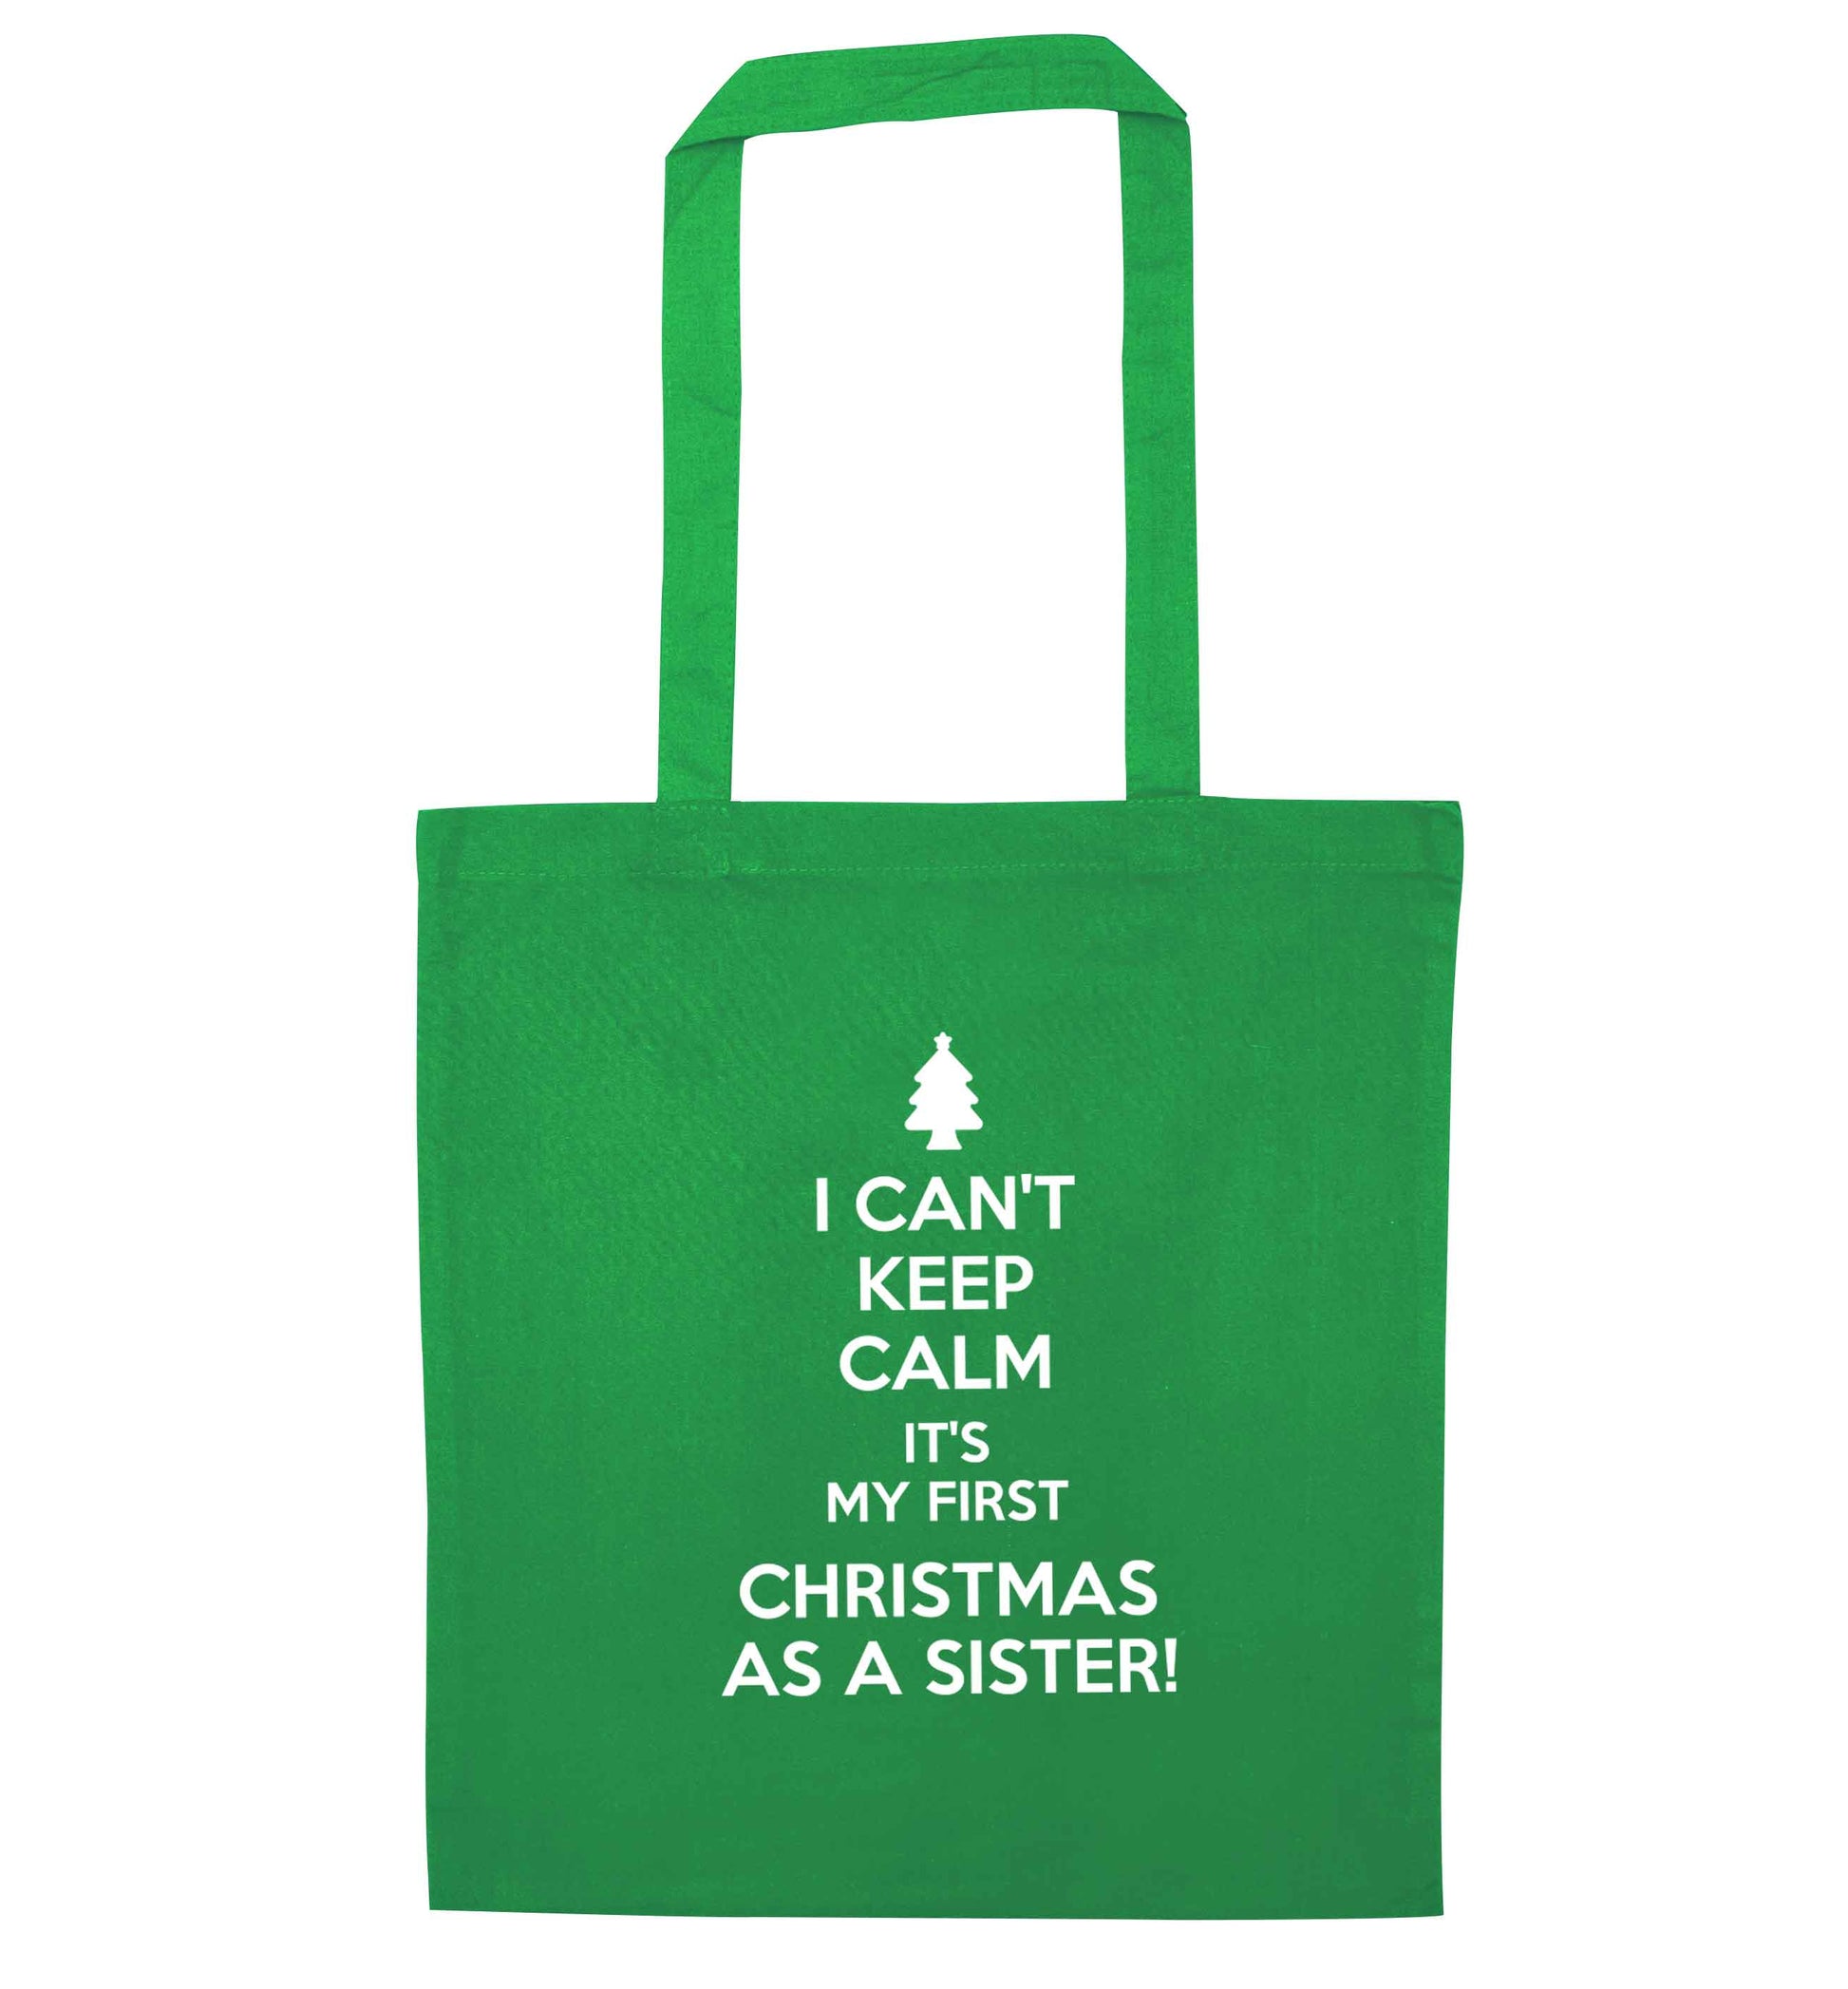 I can't keep calm it's my first Christmas as a sister! green tote bag